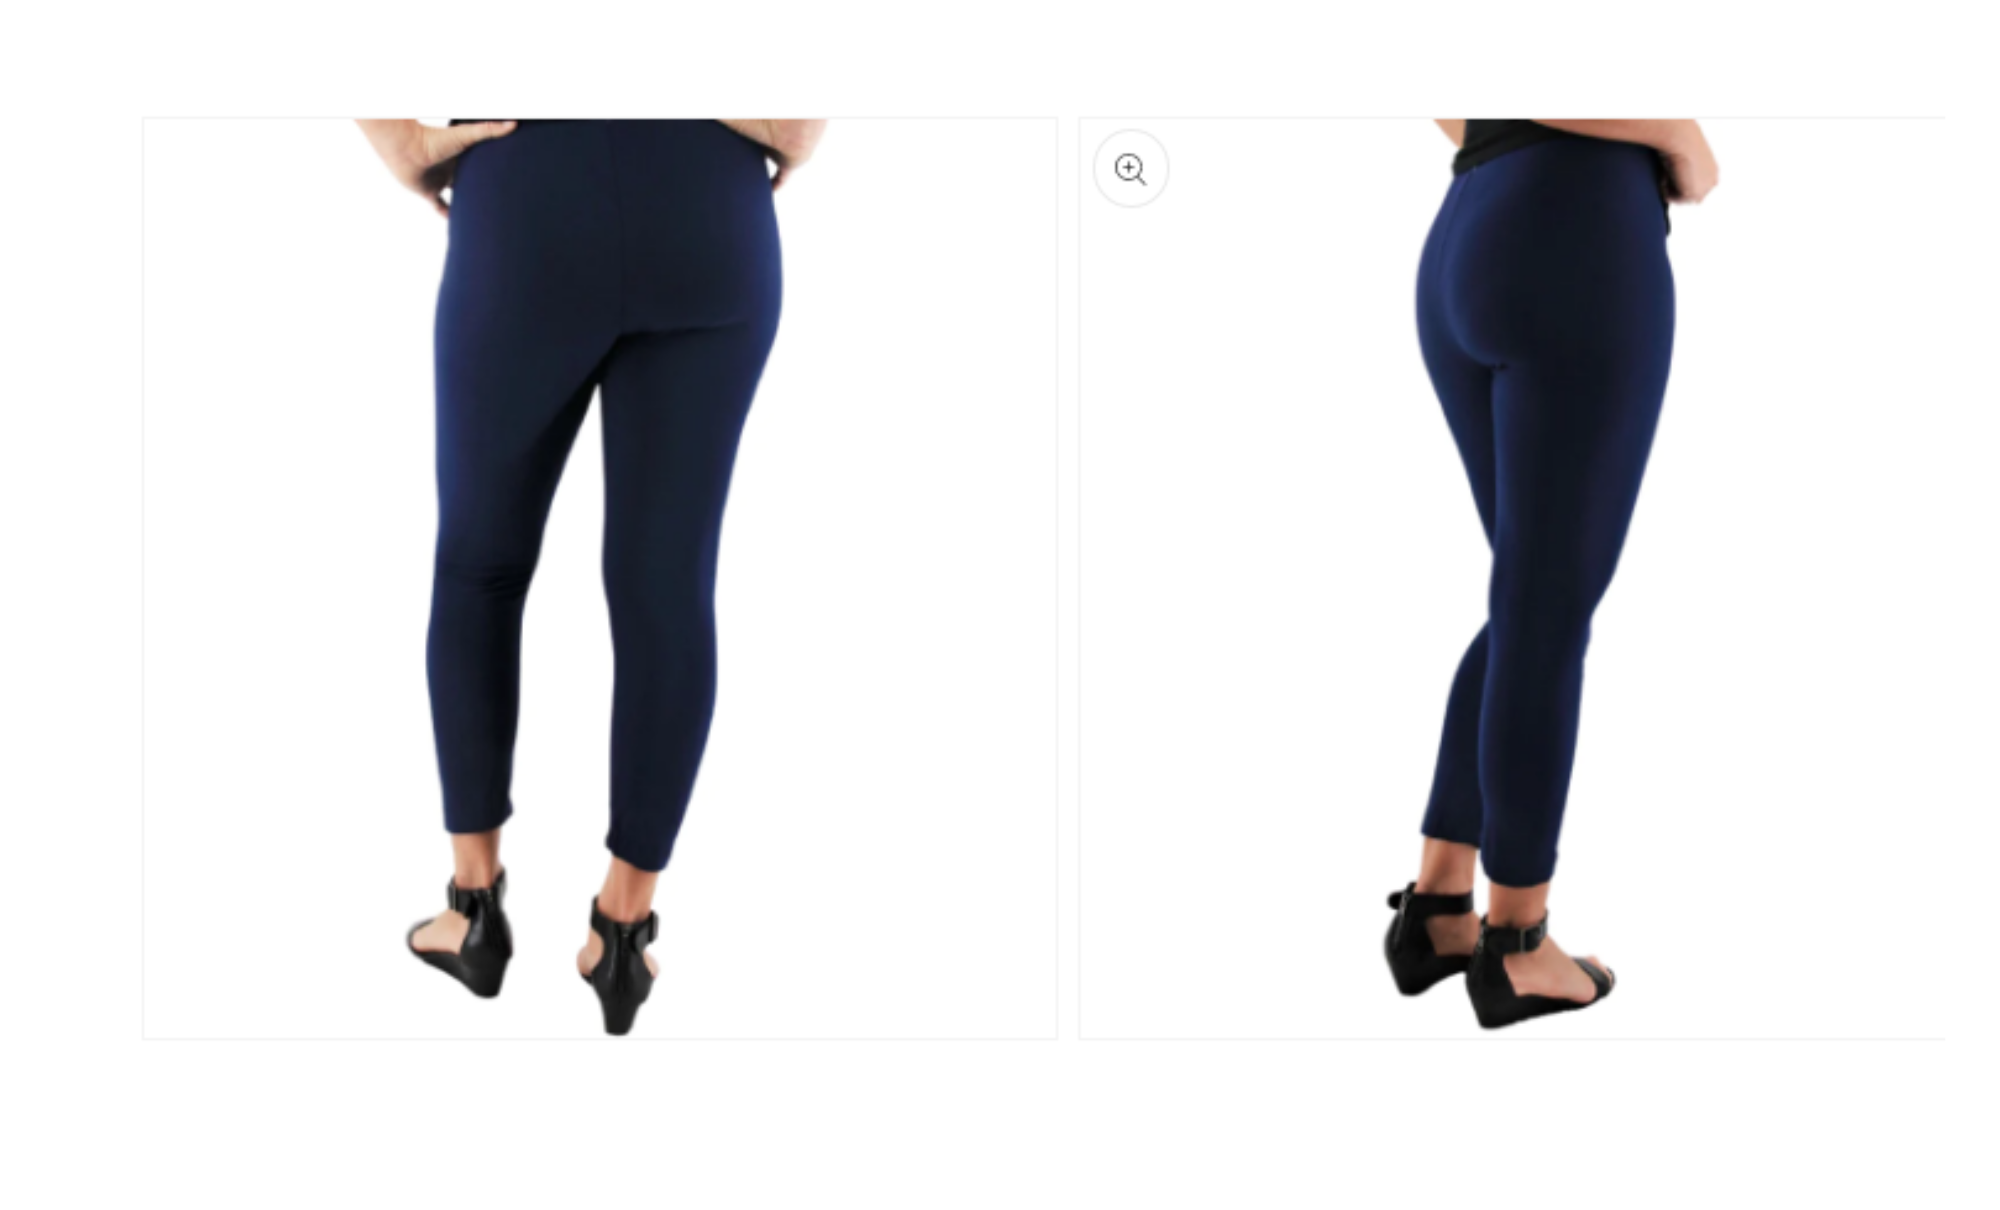 Can leggings eliminate visible panty lines? Here's our verdict